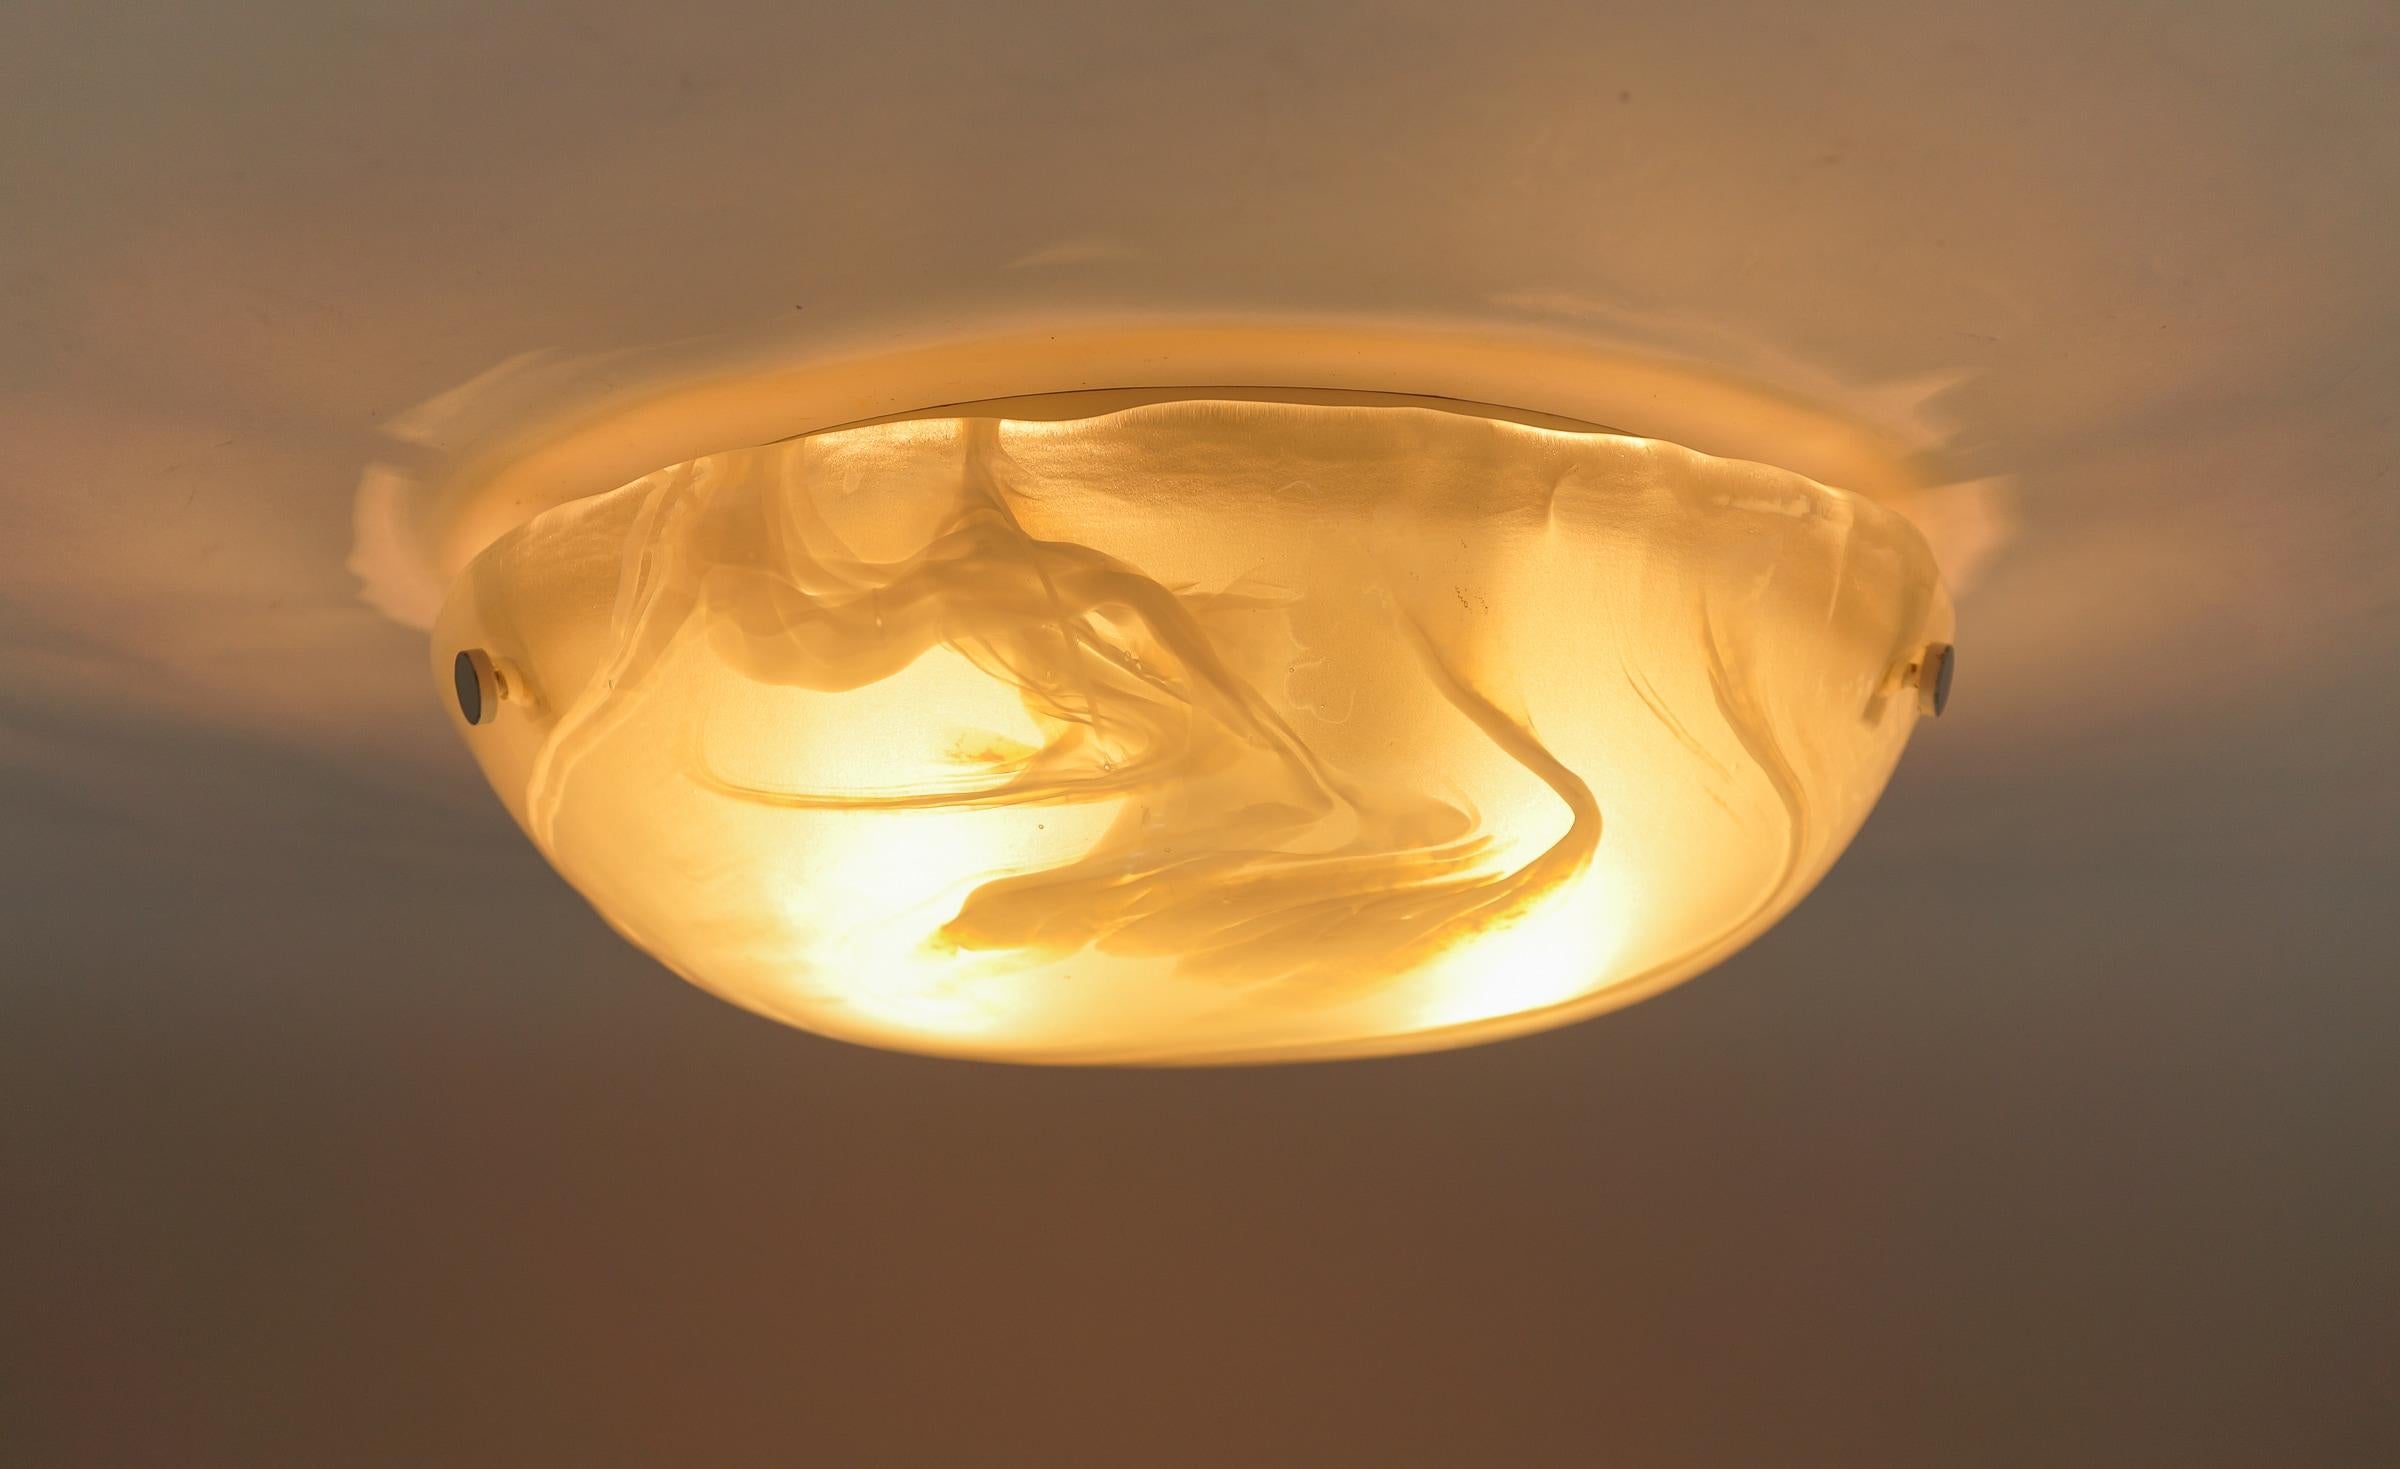 White and Gold Murano Glass Flush Mount Light by Hillebrand, Germany 1960s For Sale 2